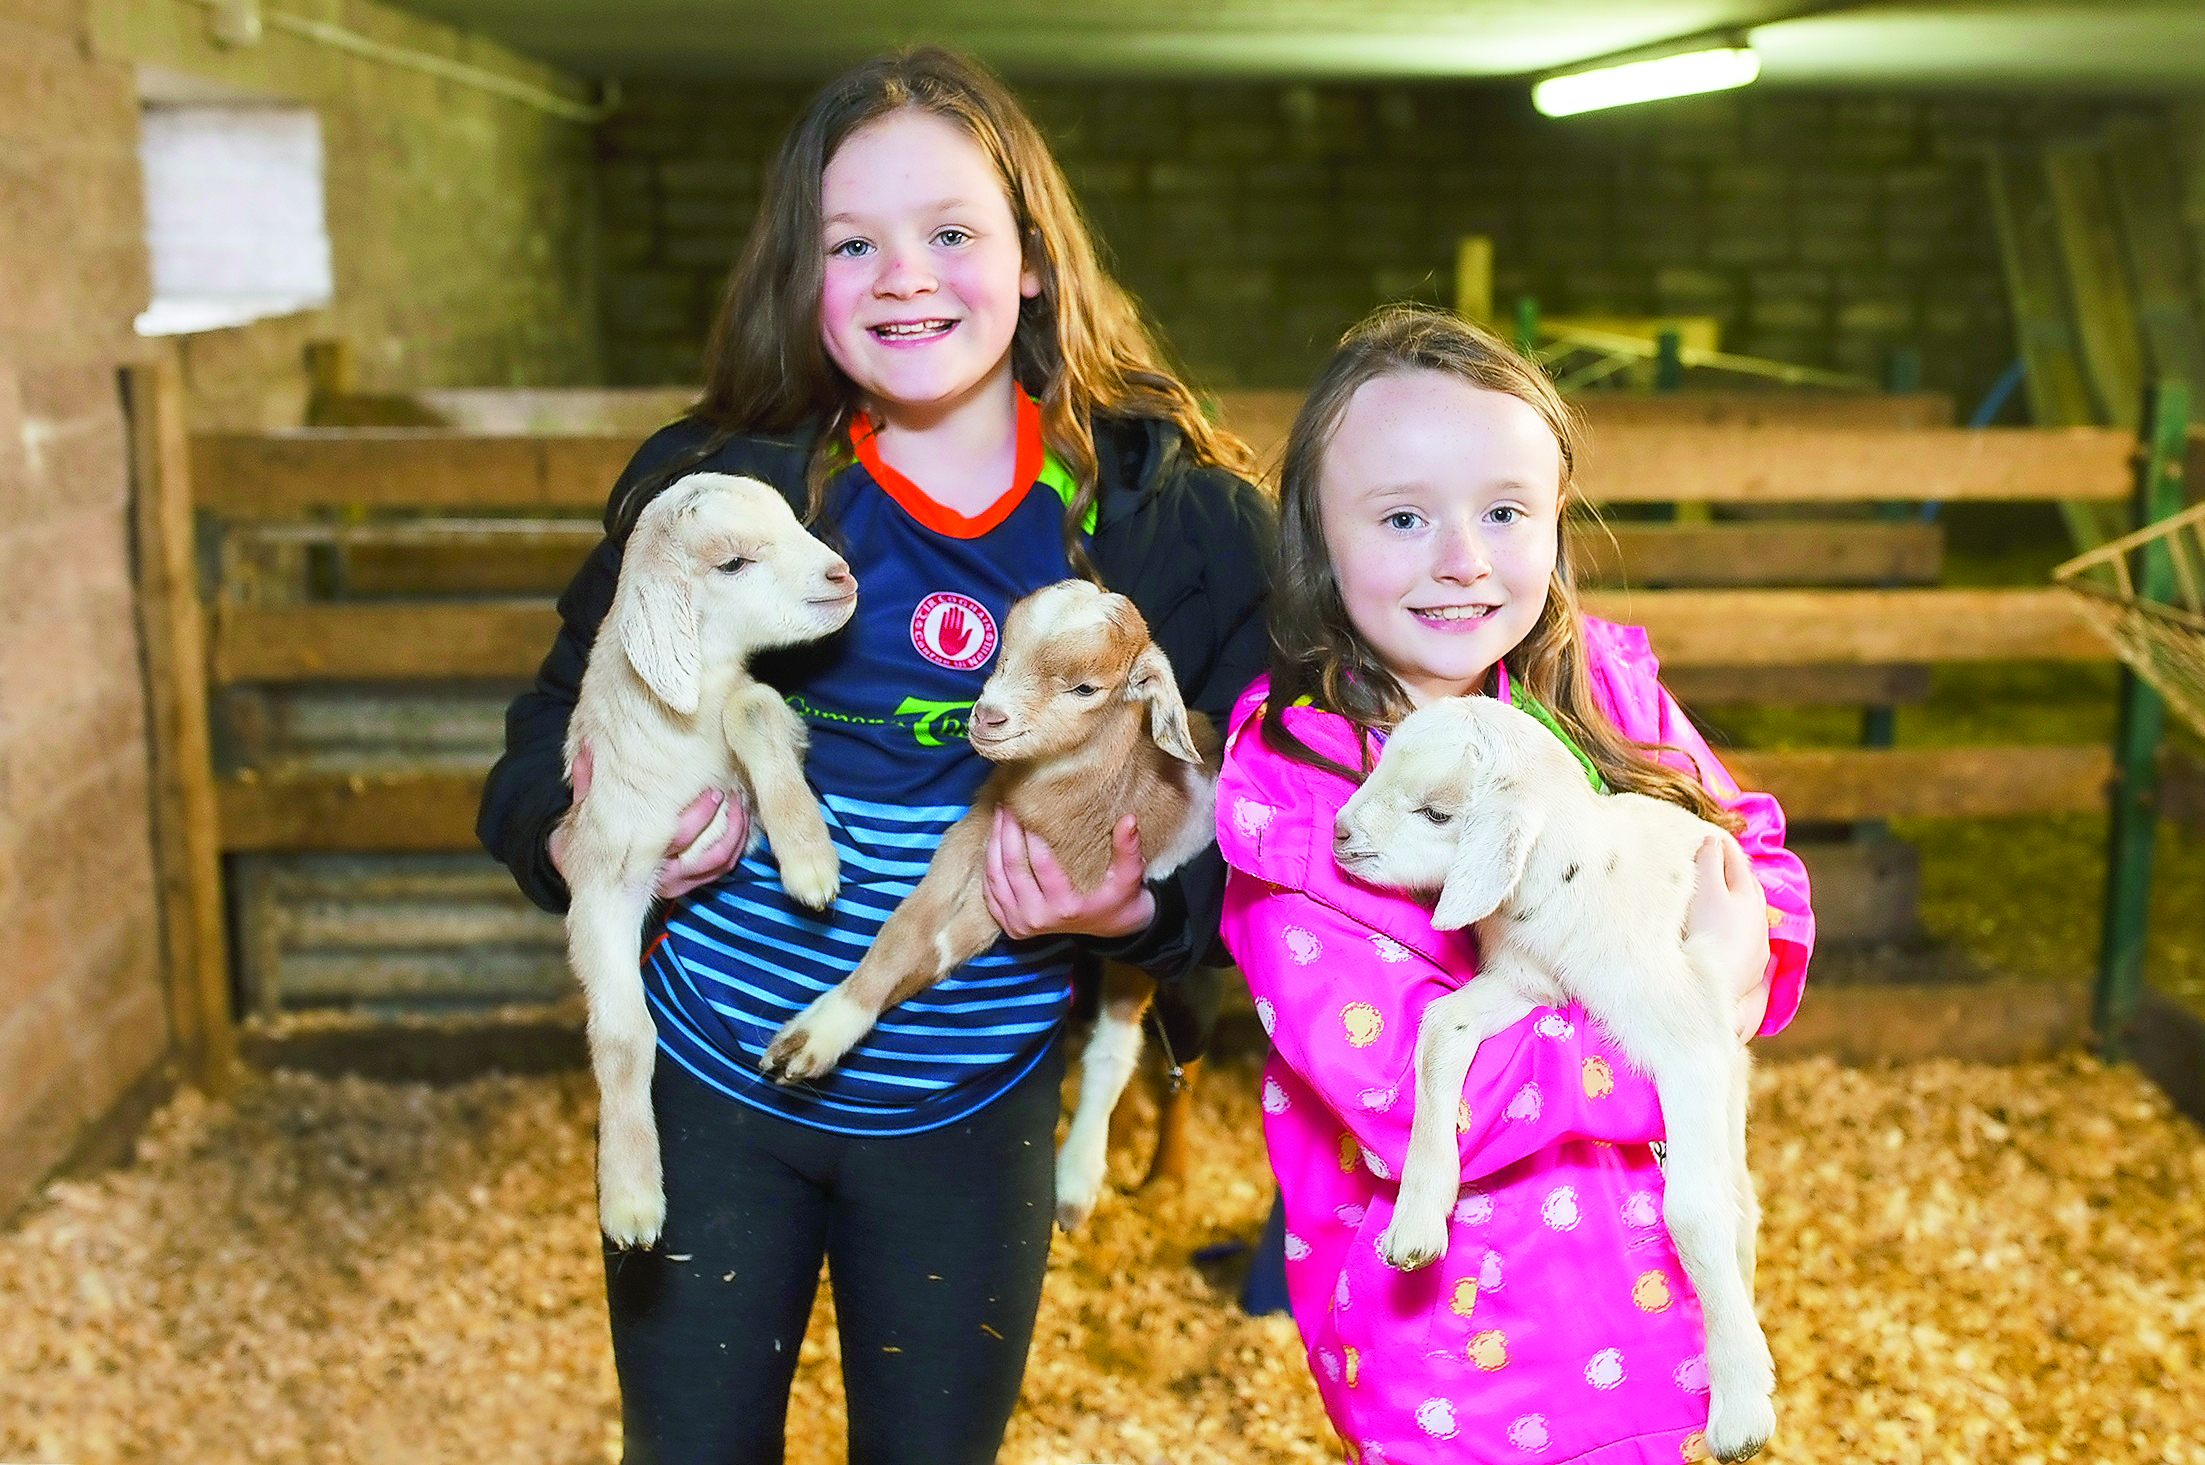 New kids on the block with birth of triplet goats